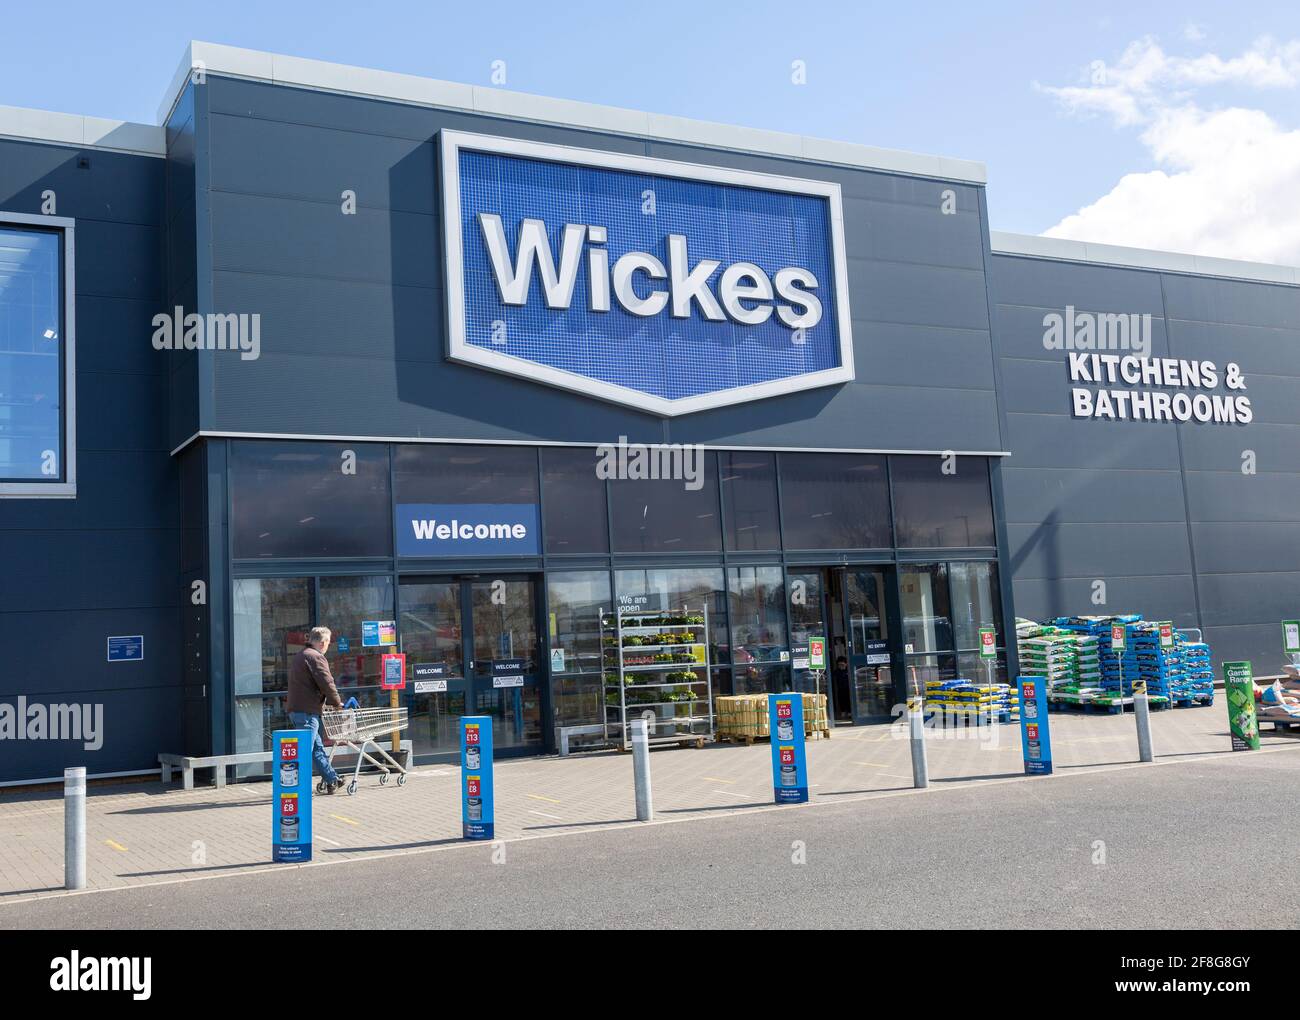 Wickes Shop High Resolution Stock Photography And Images Alamy